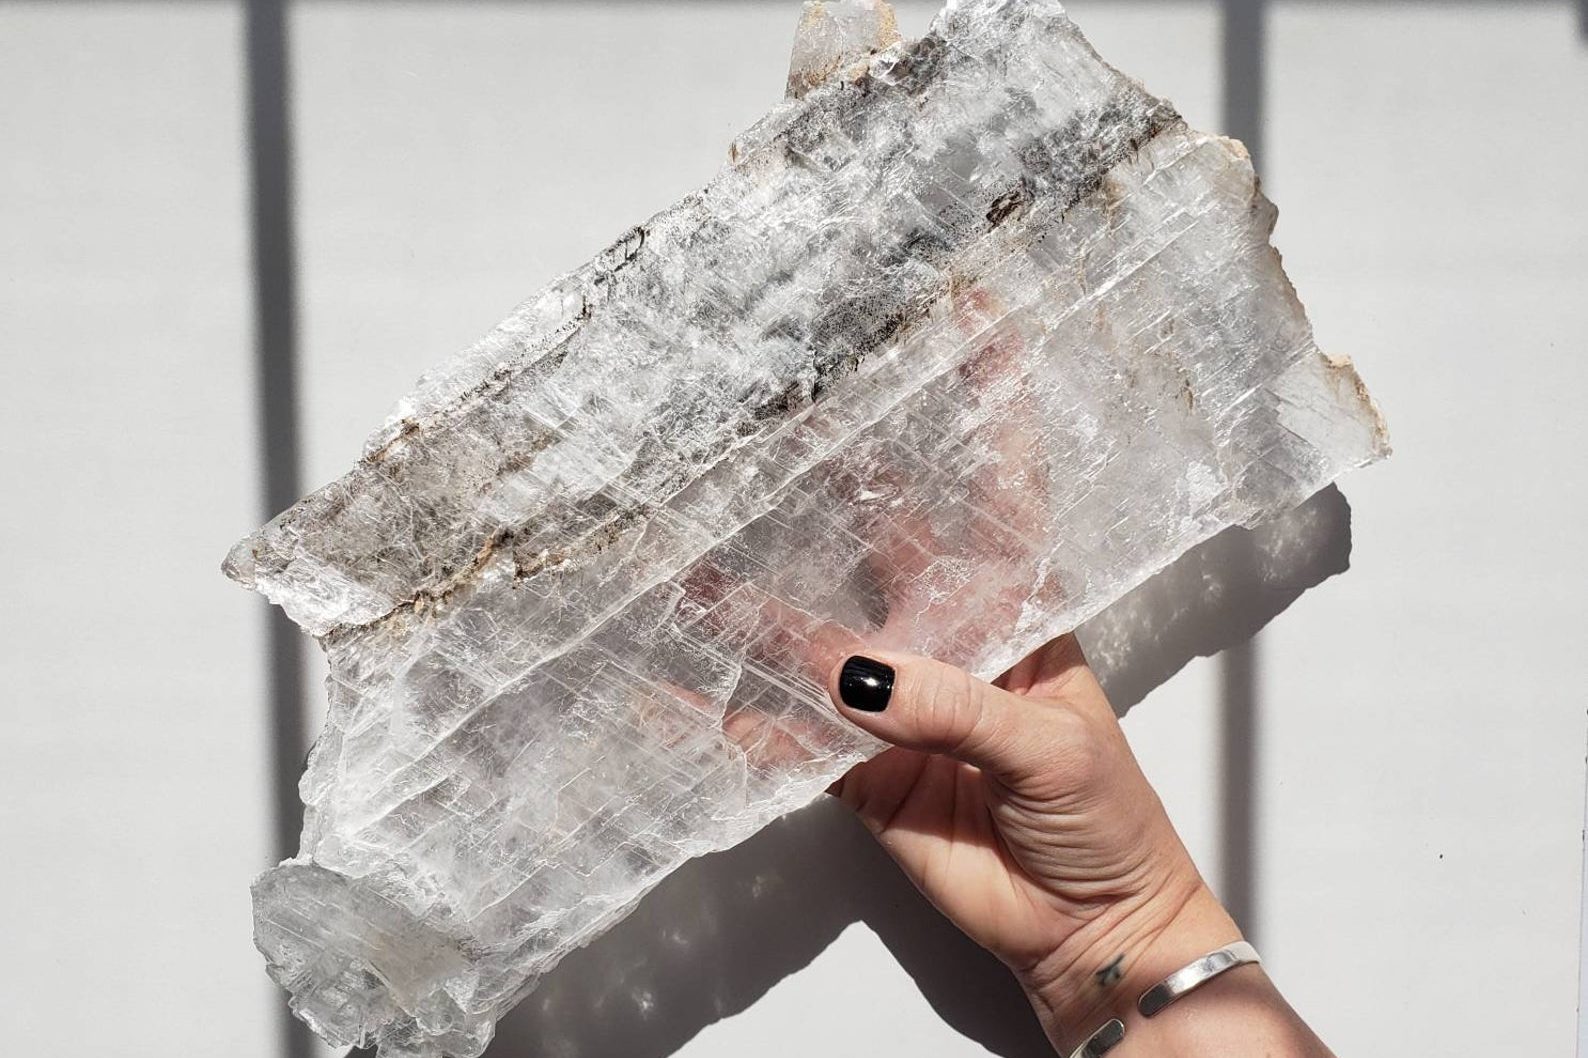 Large raw selenite slab held by a human hand in direct sunlight